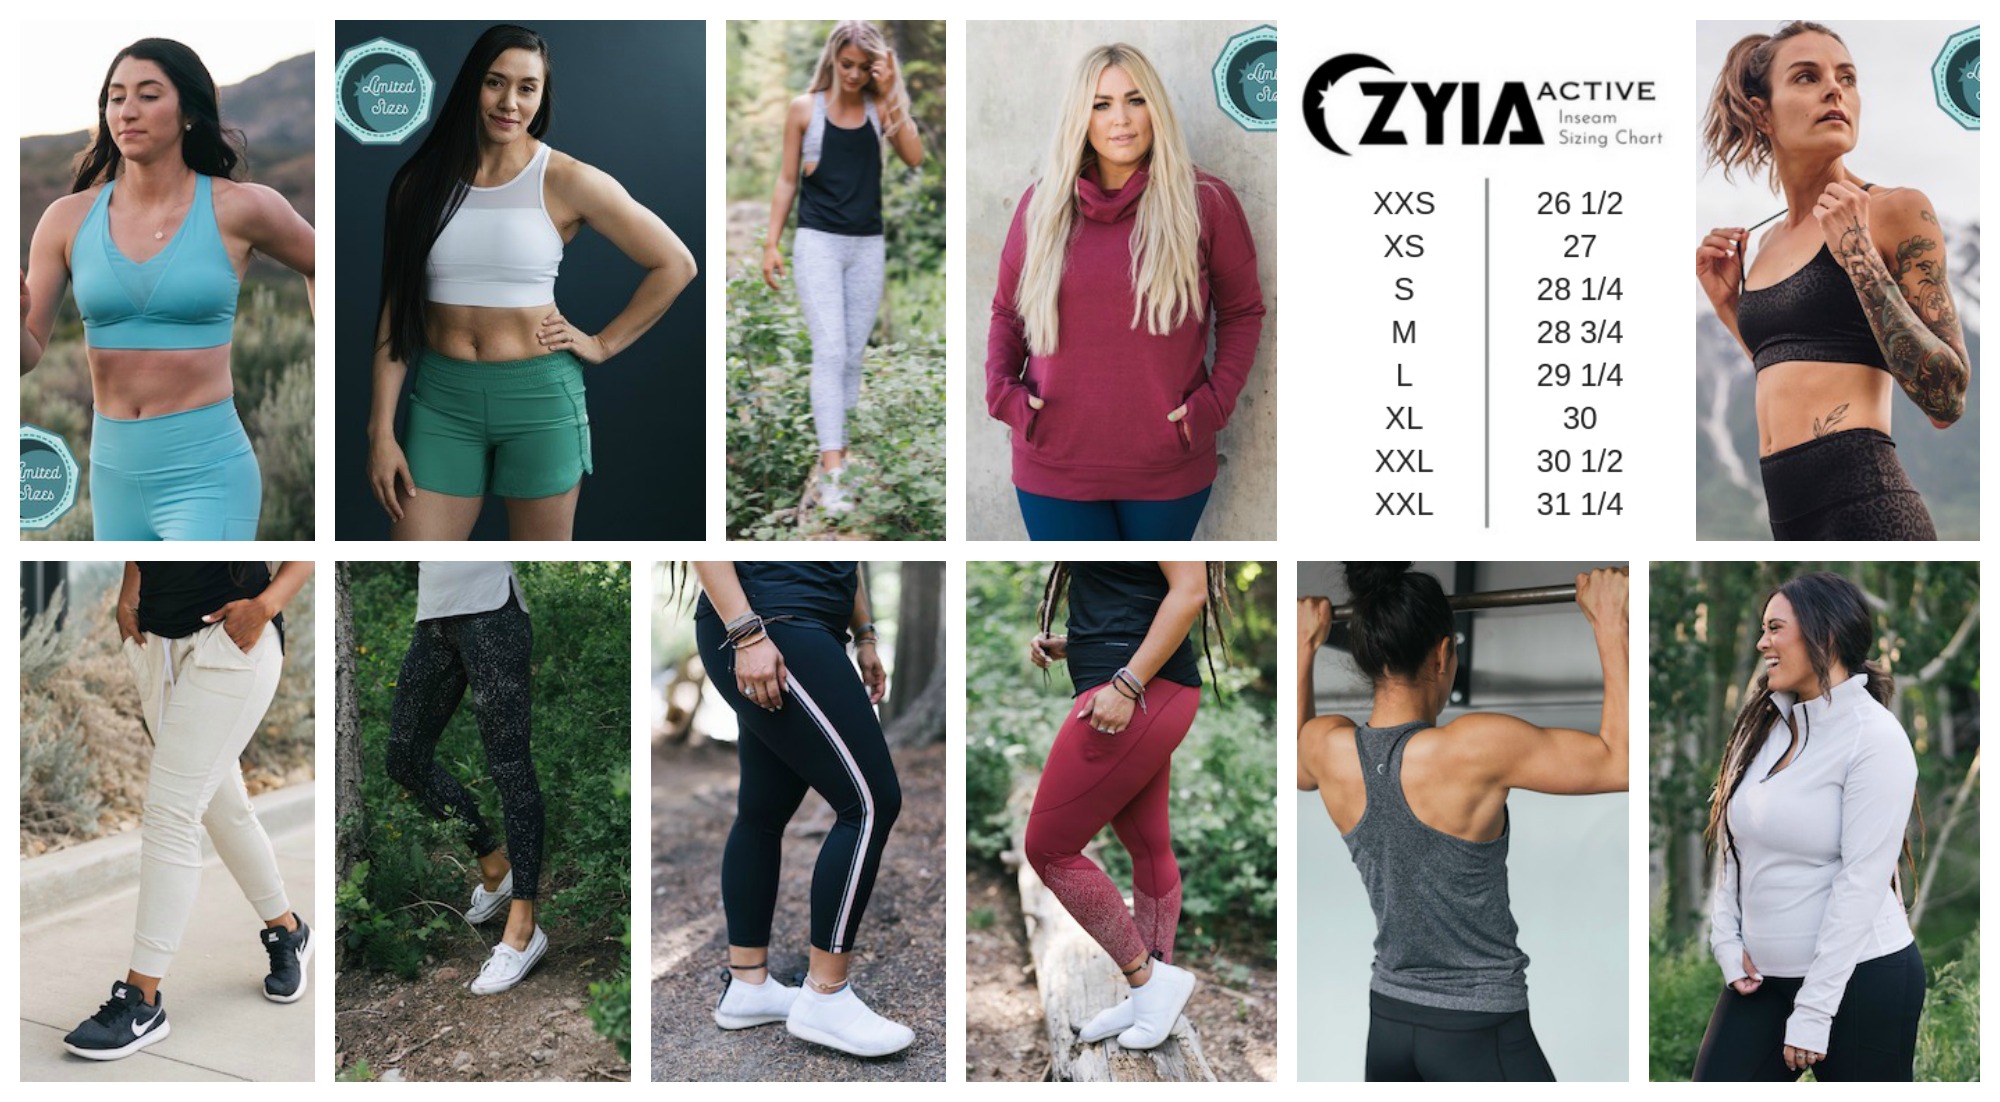 Zyia Light n Tights  If there was one product to know from Zyia